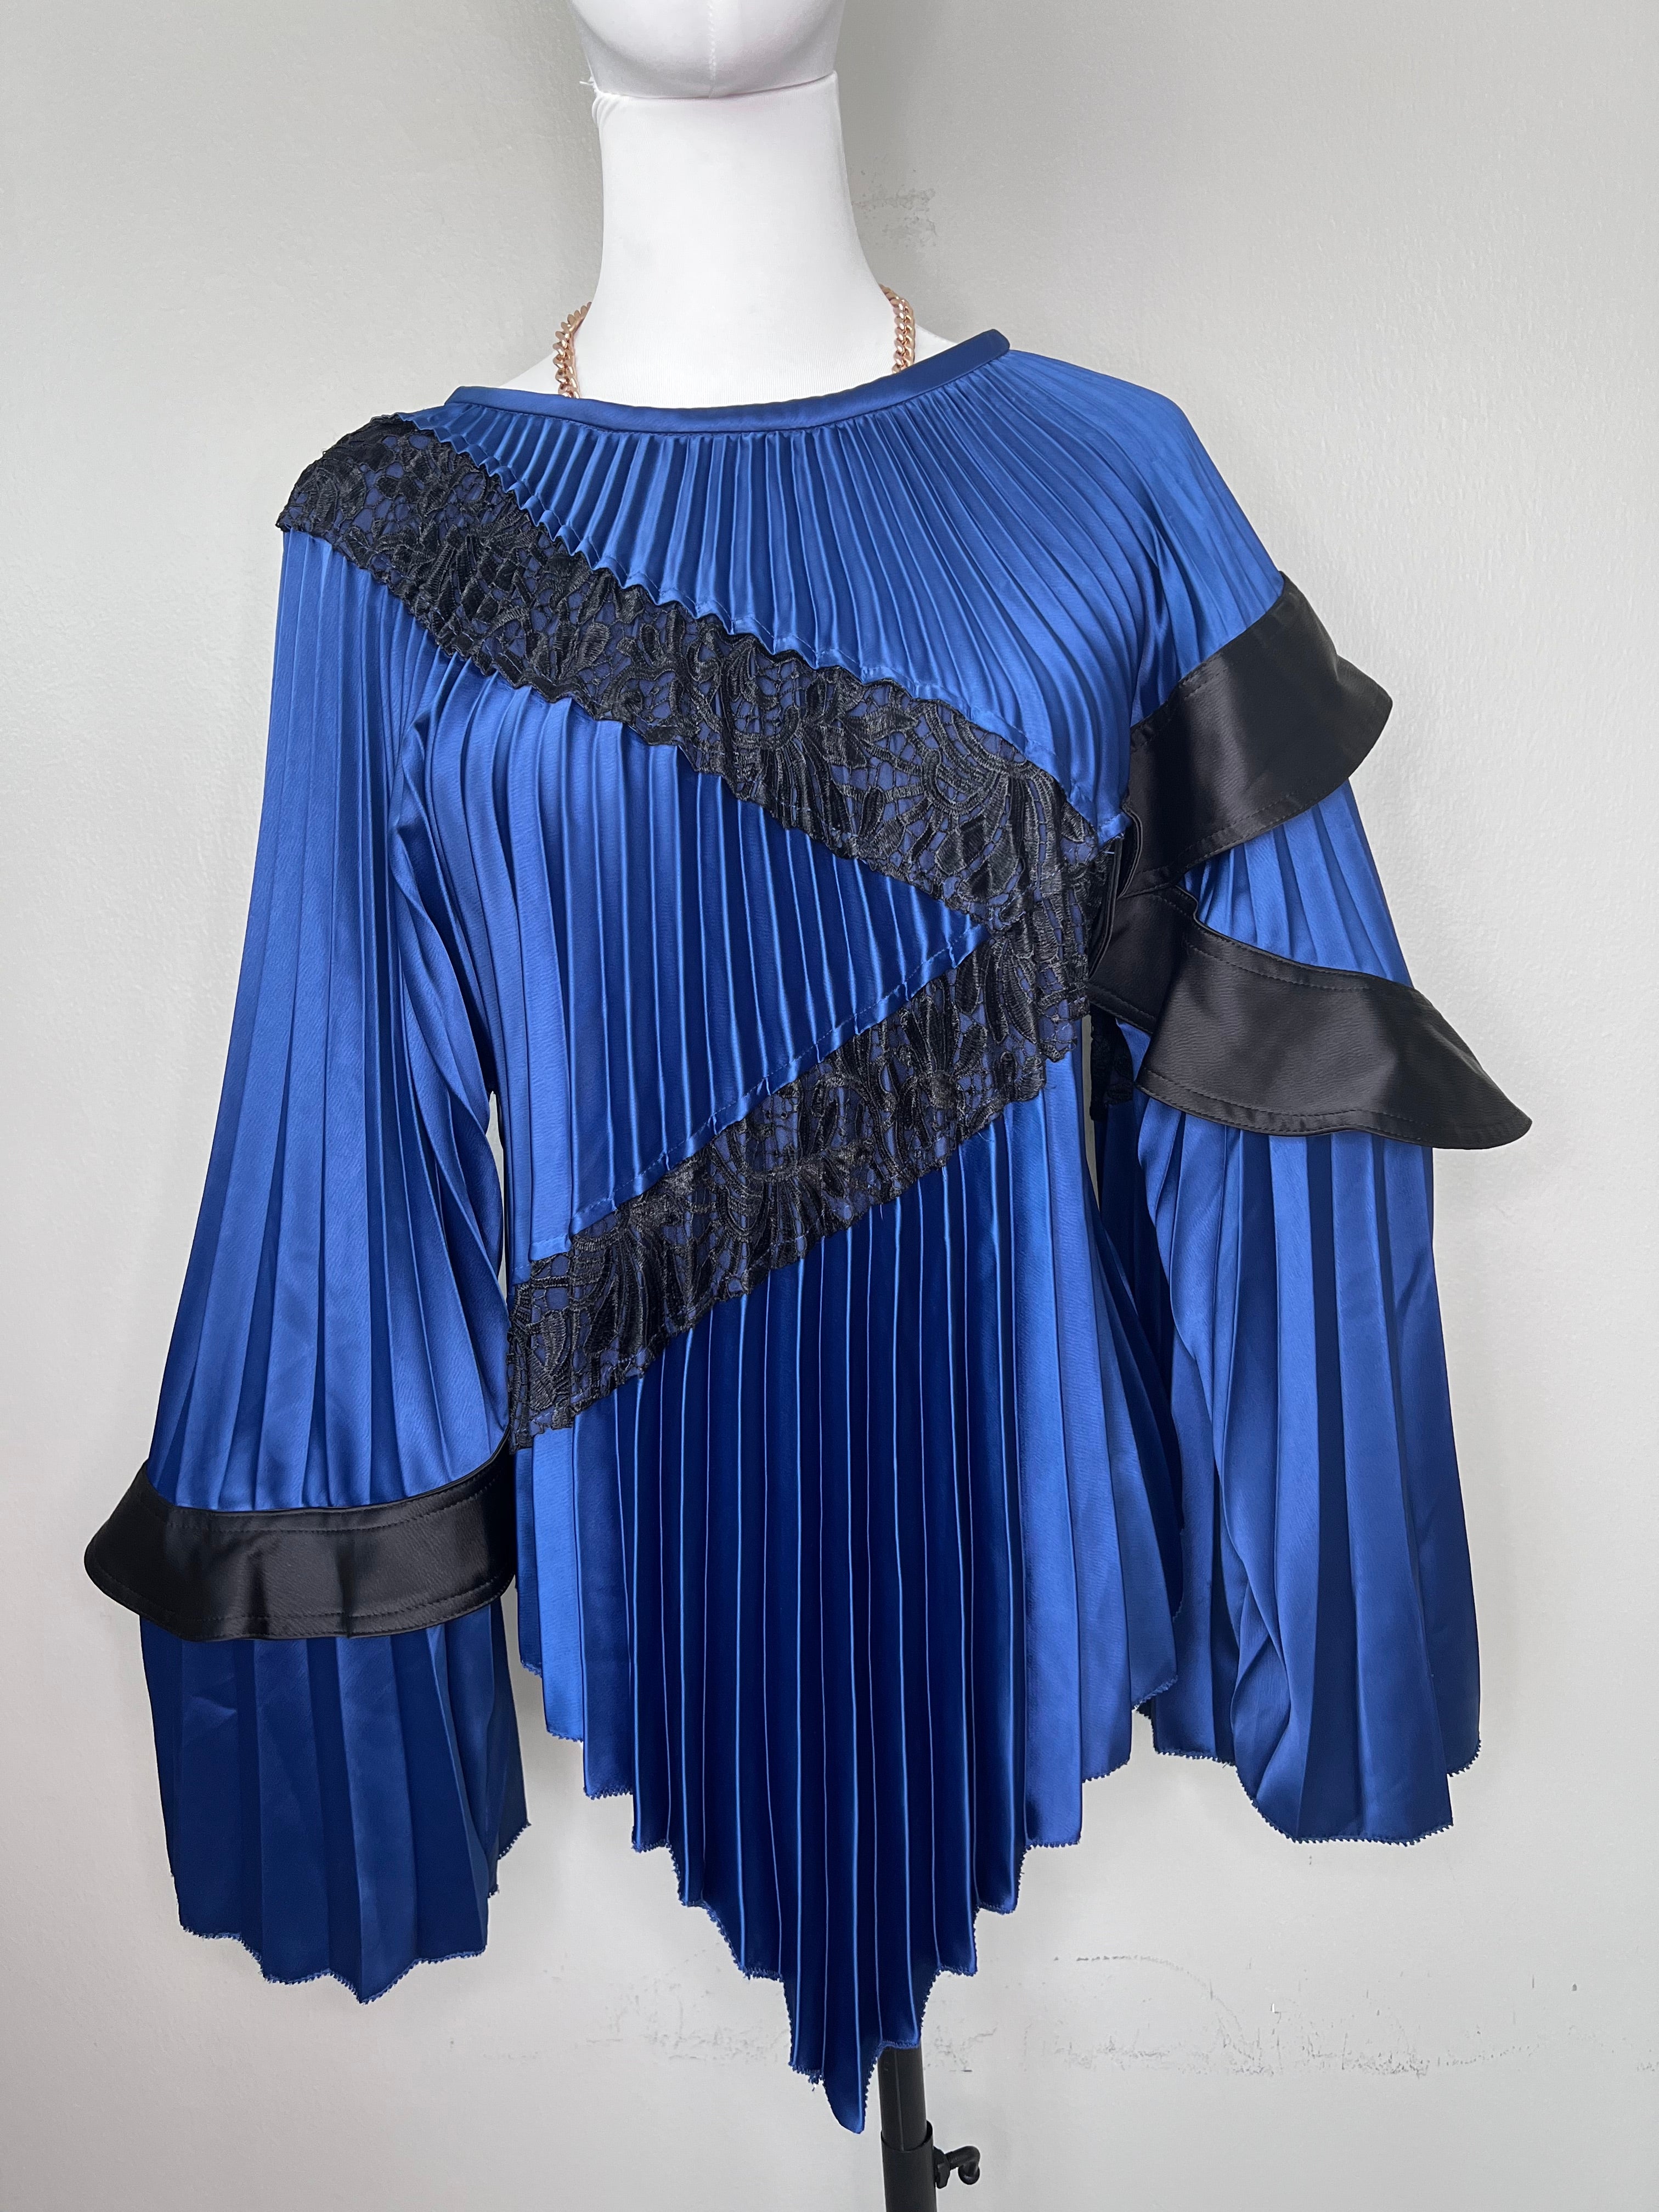 Blue chic top with black mesh pattern across flowy sleeves and gold chain around neck - SELF-PORTRAIT